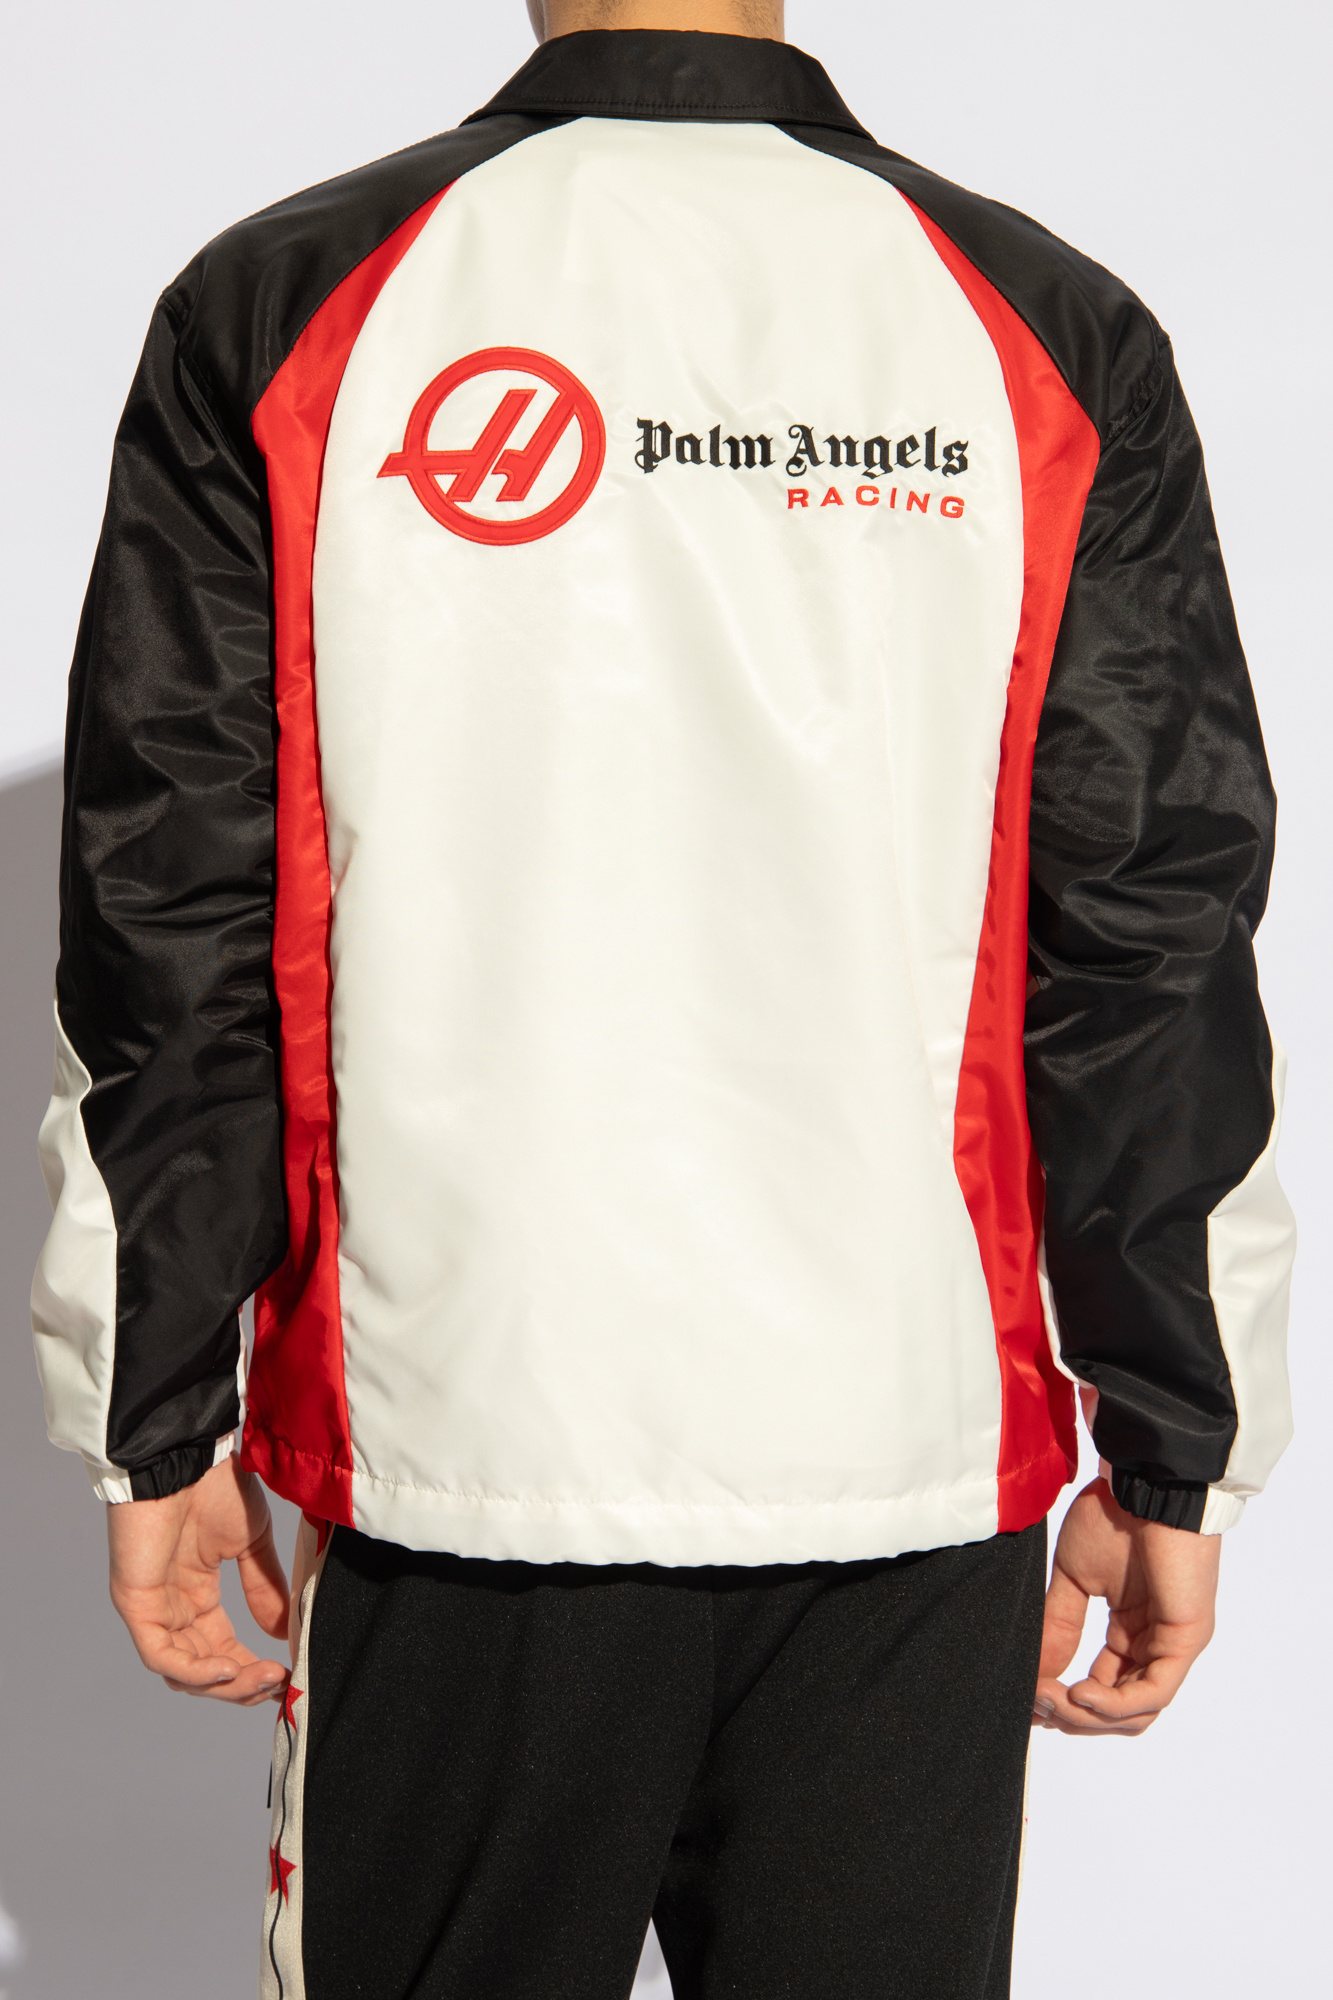 Palm Angels Jacket with logo